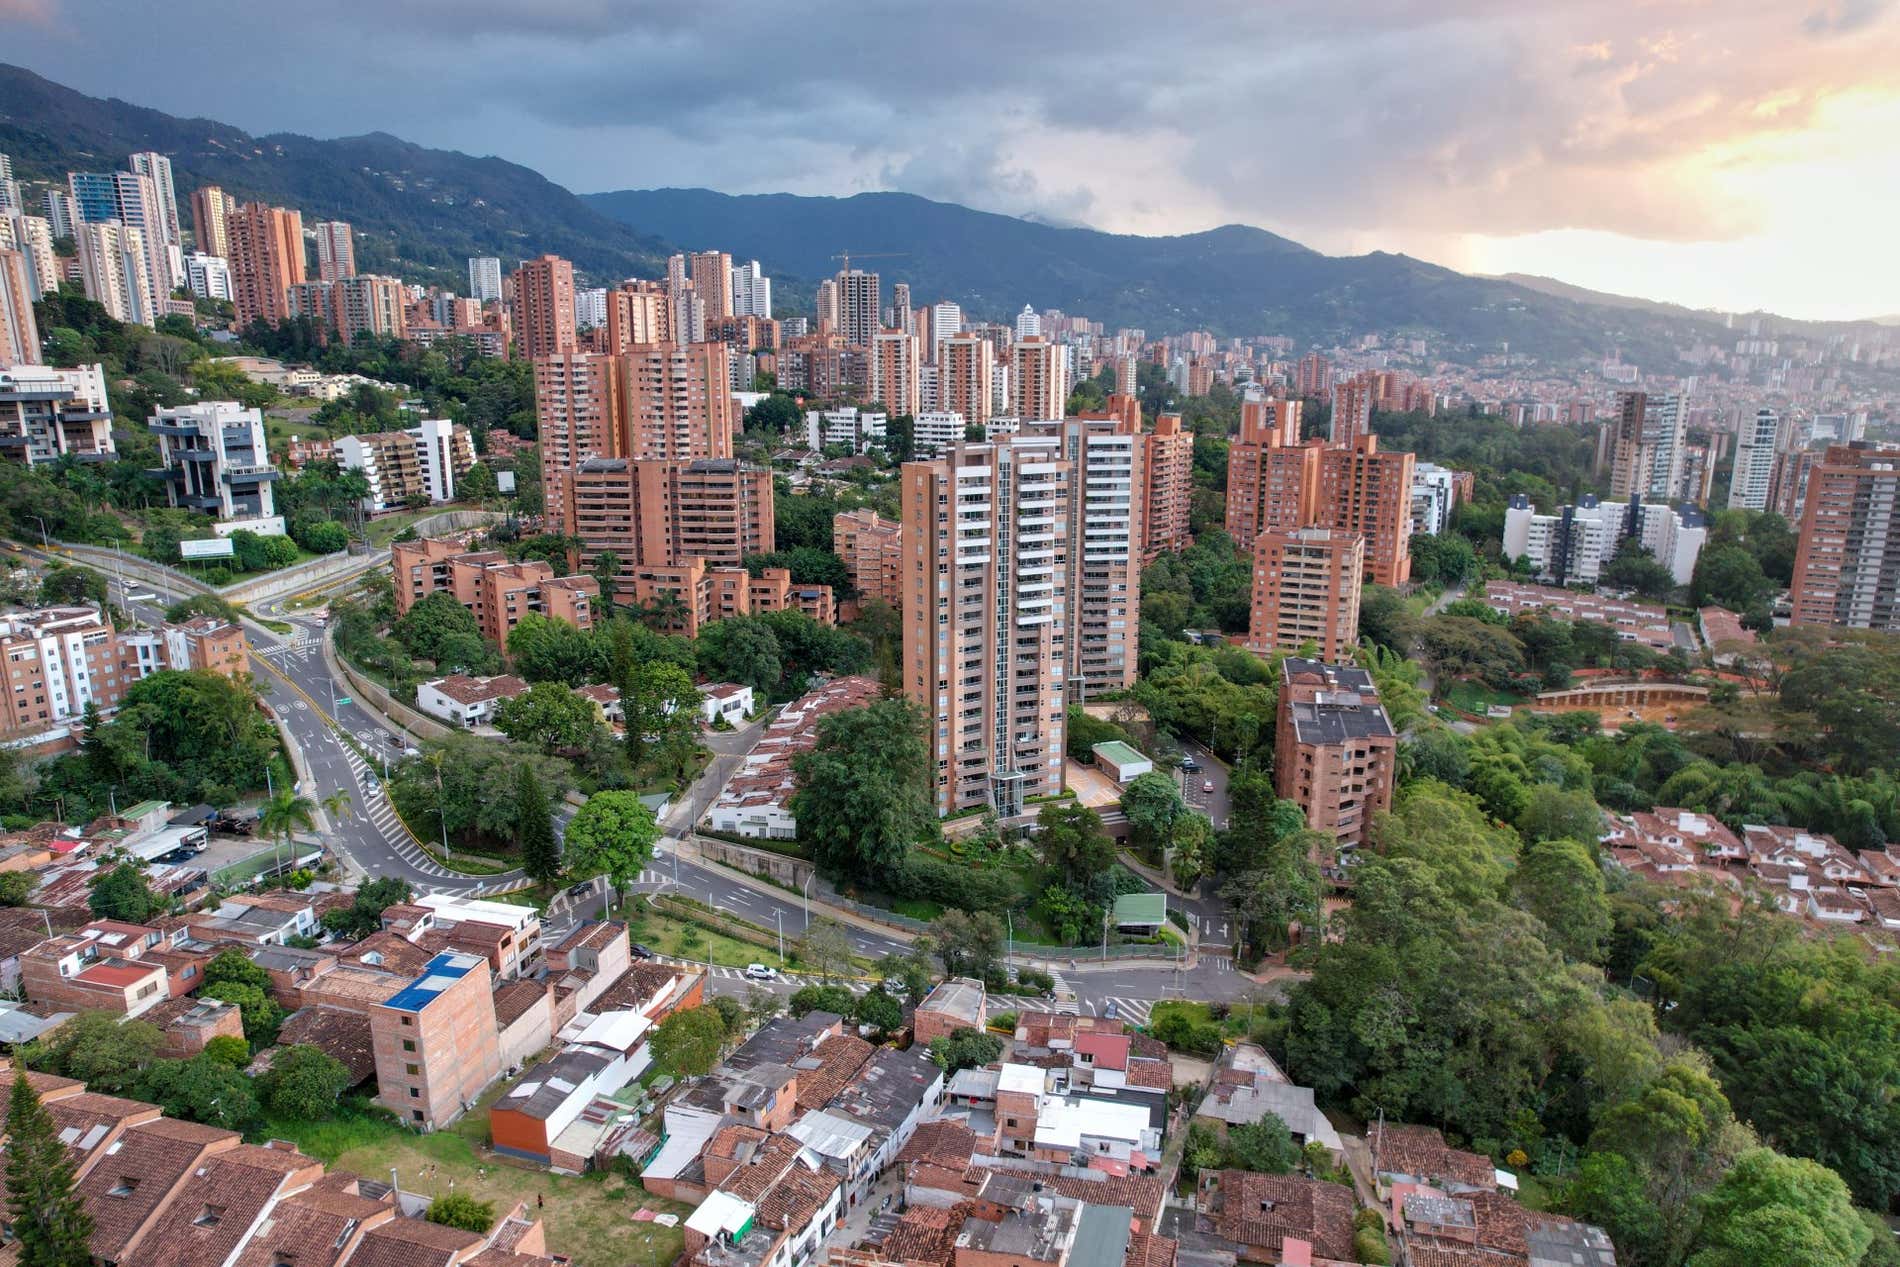 Top 10: Things to Do in Medellín